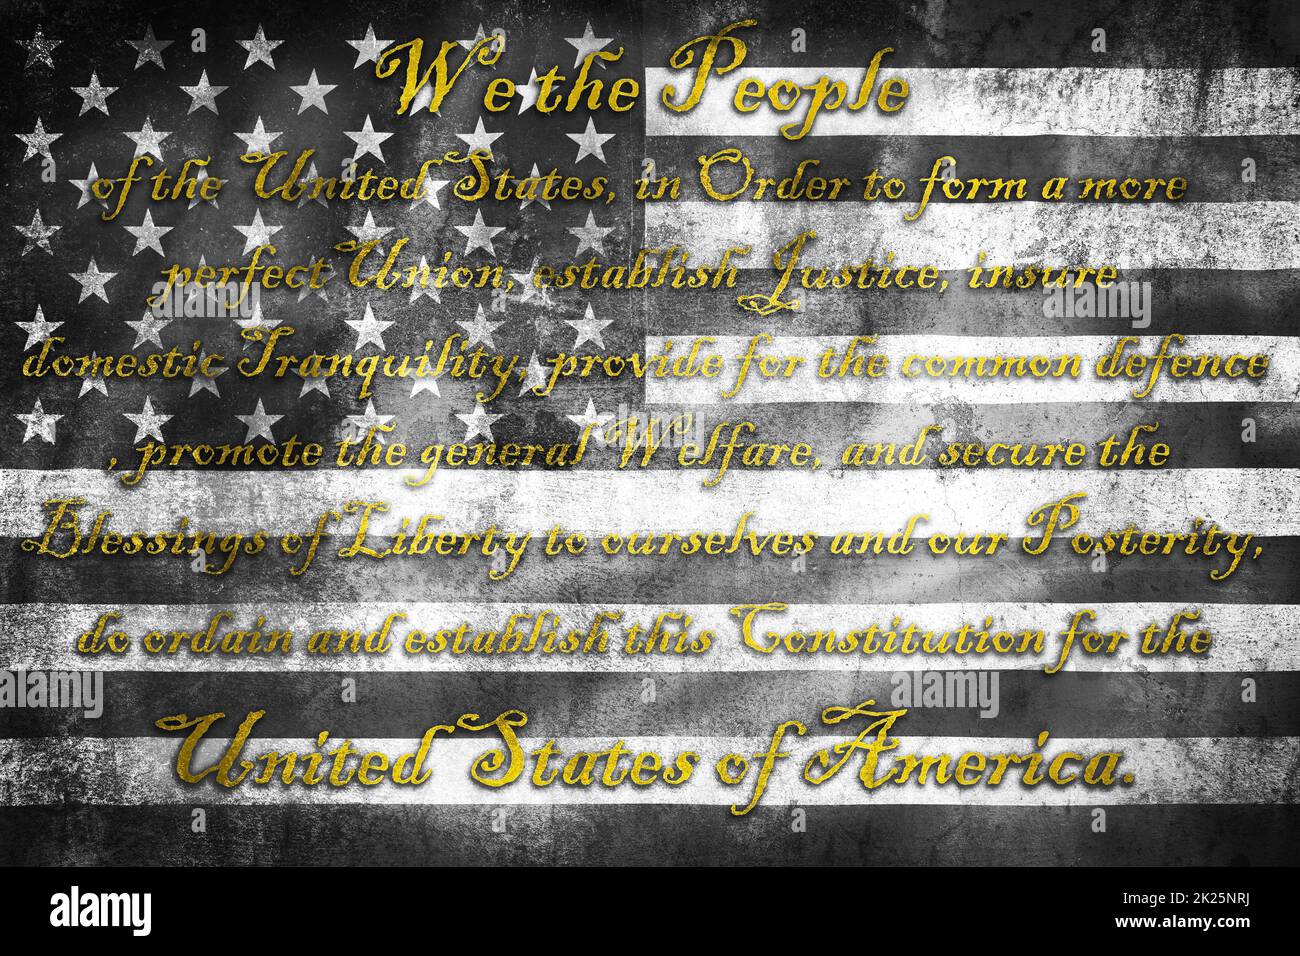 USA Constitution preamble We the People on grunge black and white US flag Stock Photo